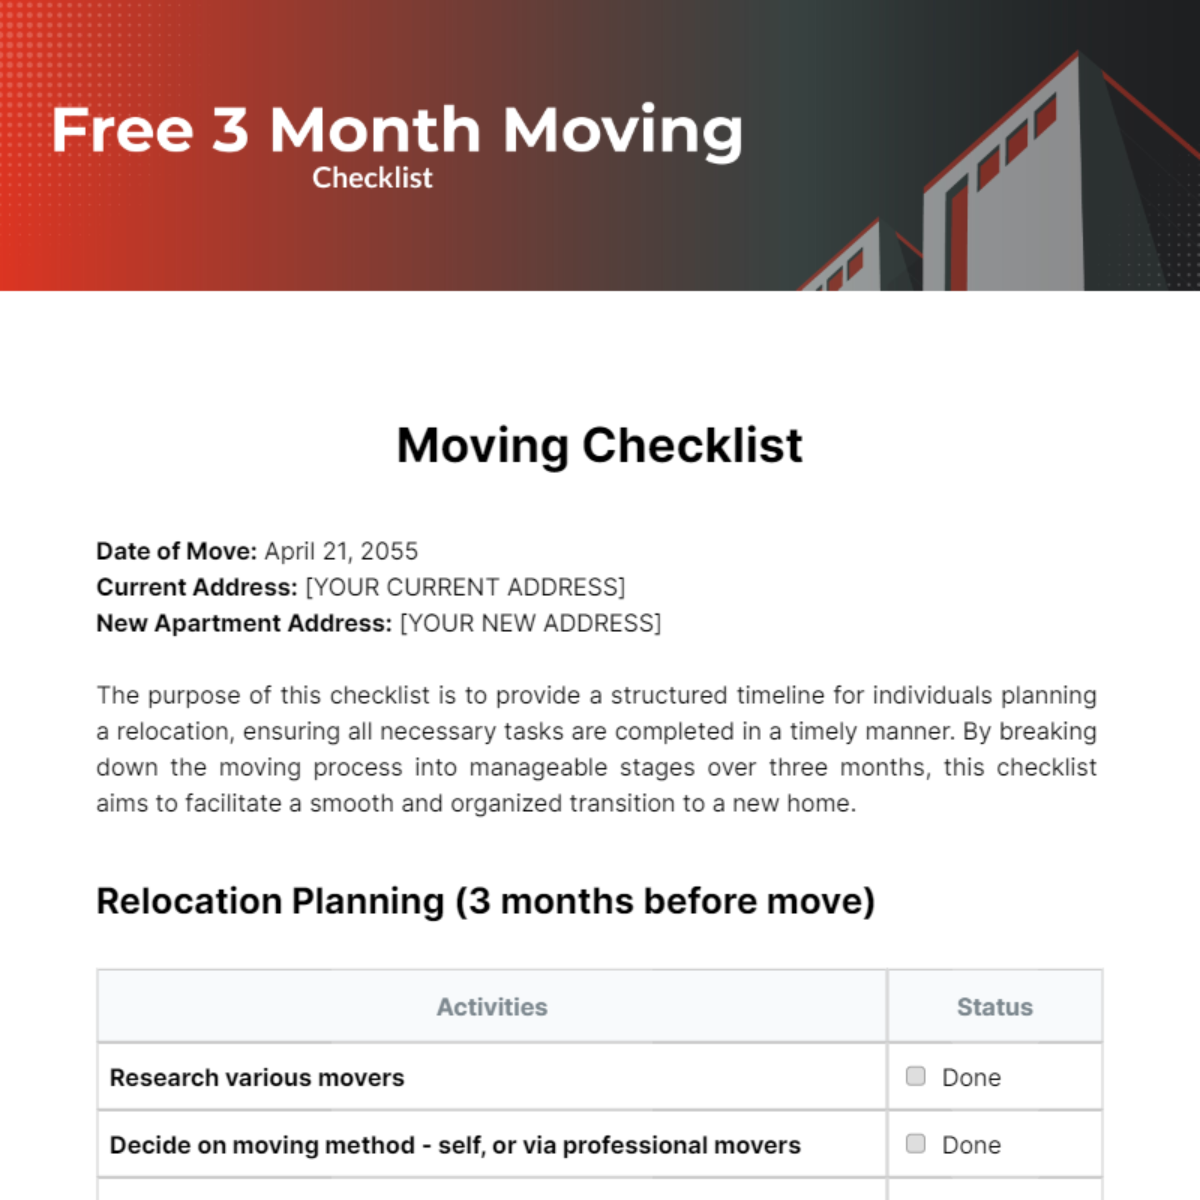 Free 3 Month Moving Checklist Template